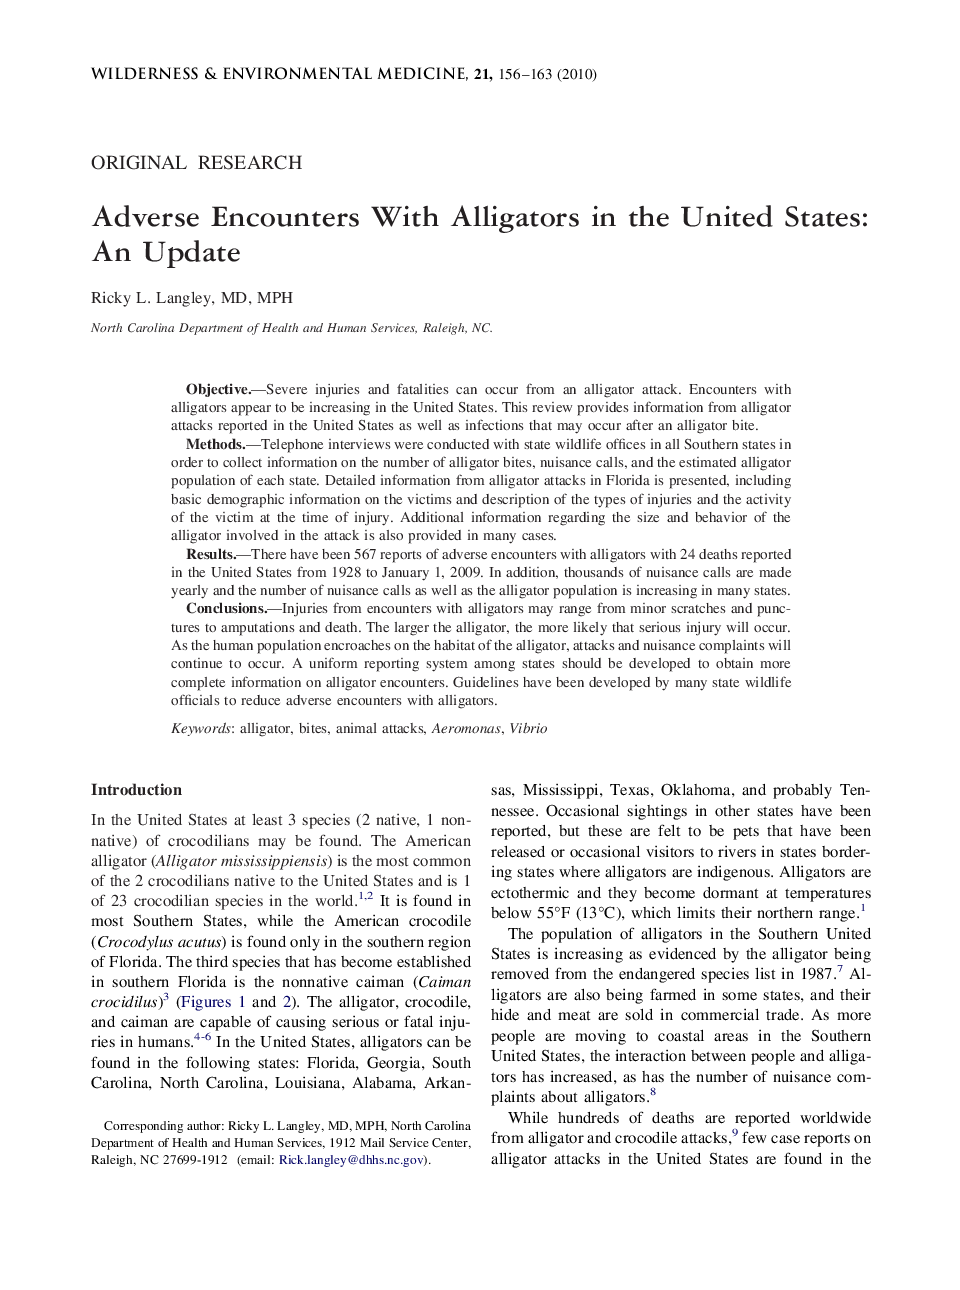 Adverse Encounters With Alligators in the United States: An Update